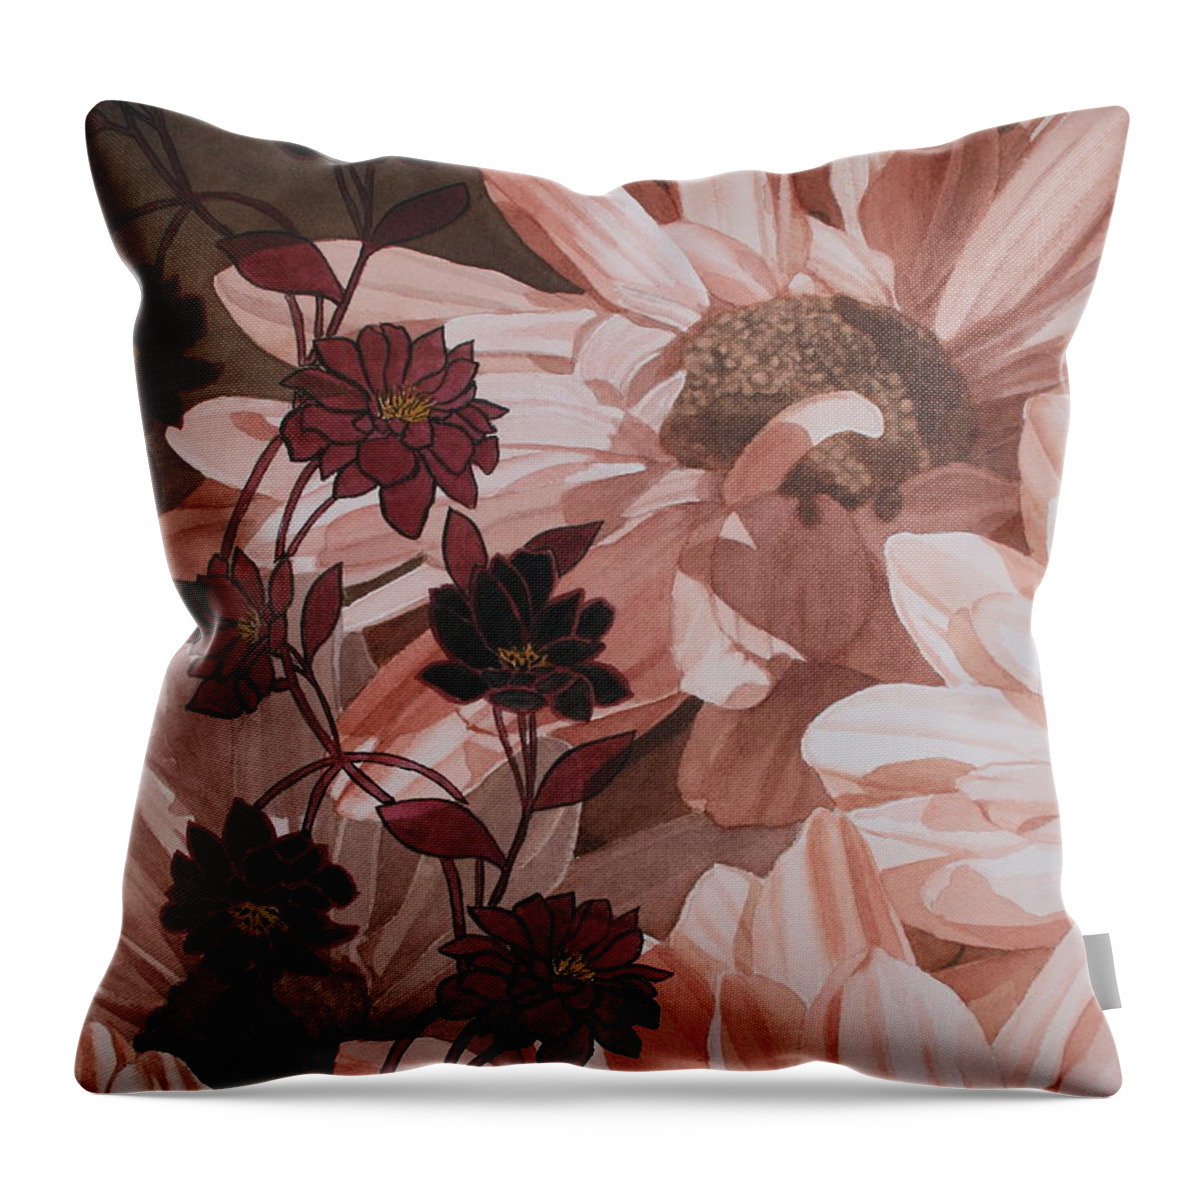 Jan Lawnikanis Throw Pillow featuring the painting Appreciation 2 by Jan Lawnikanis